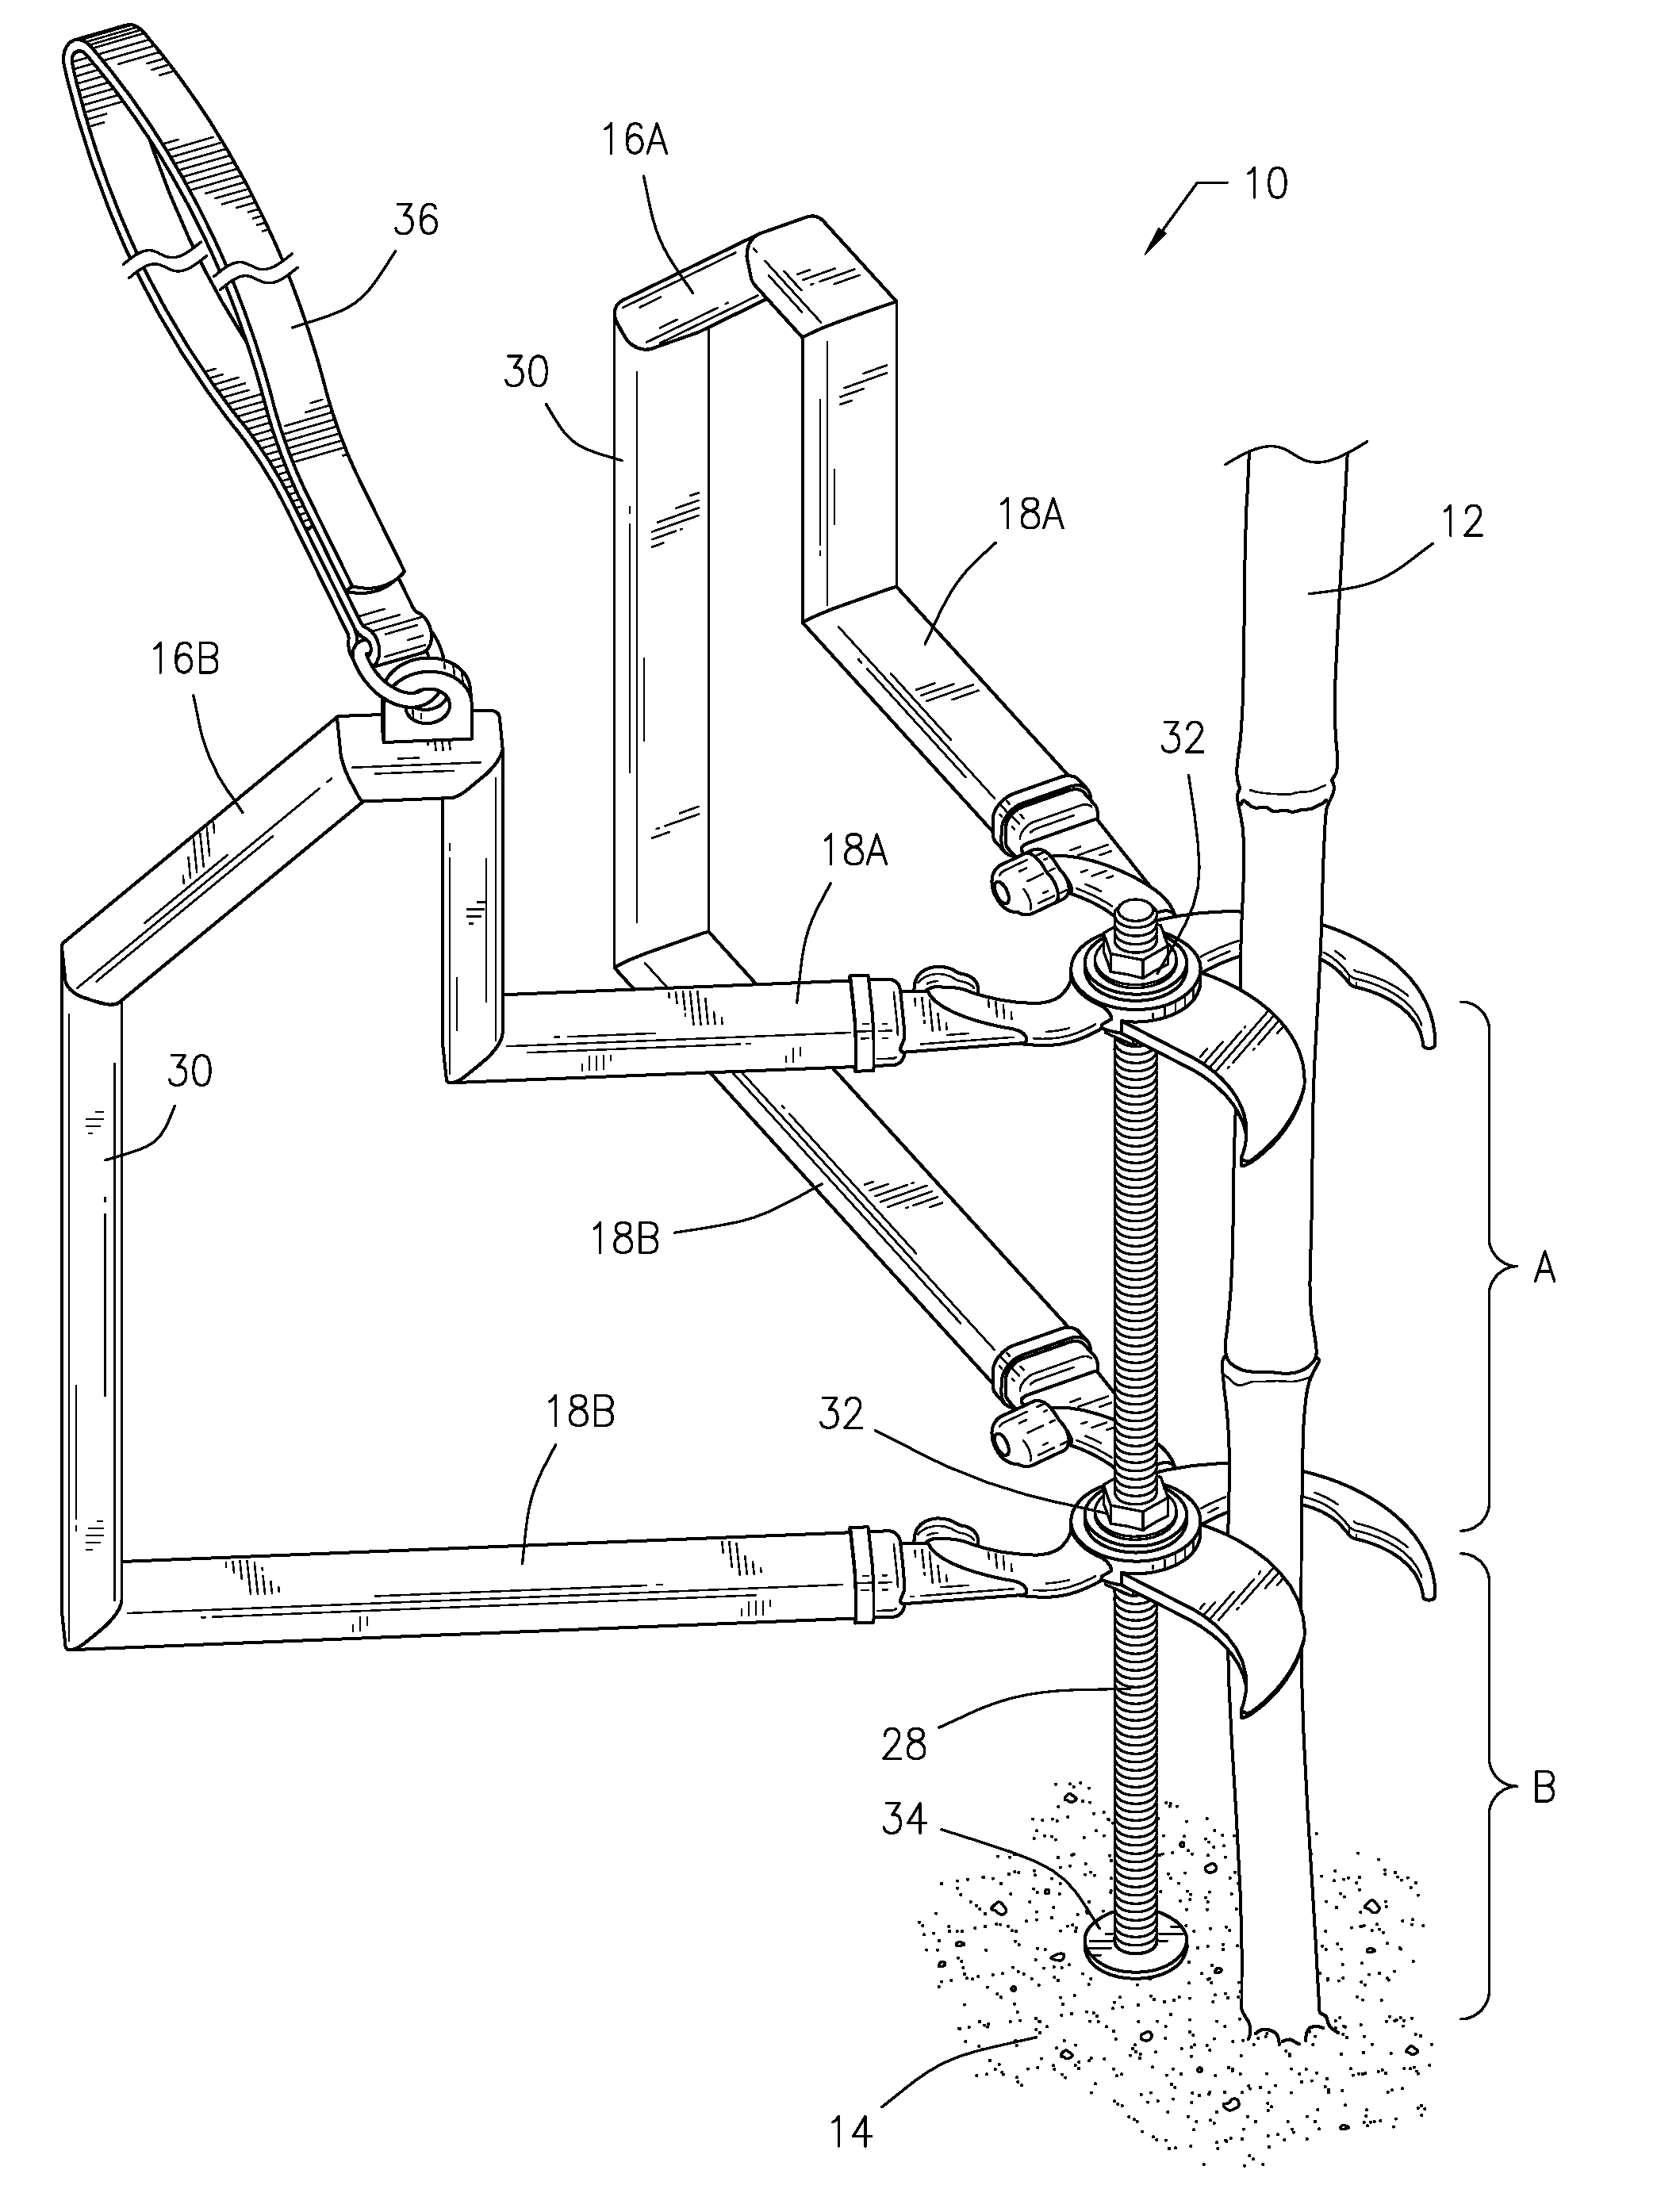 Stalk cutter device and method of use